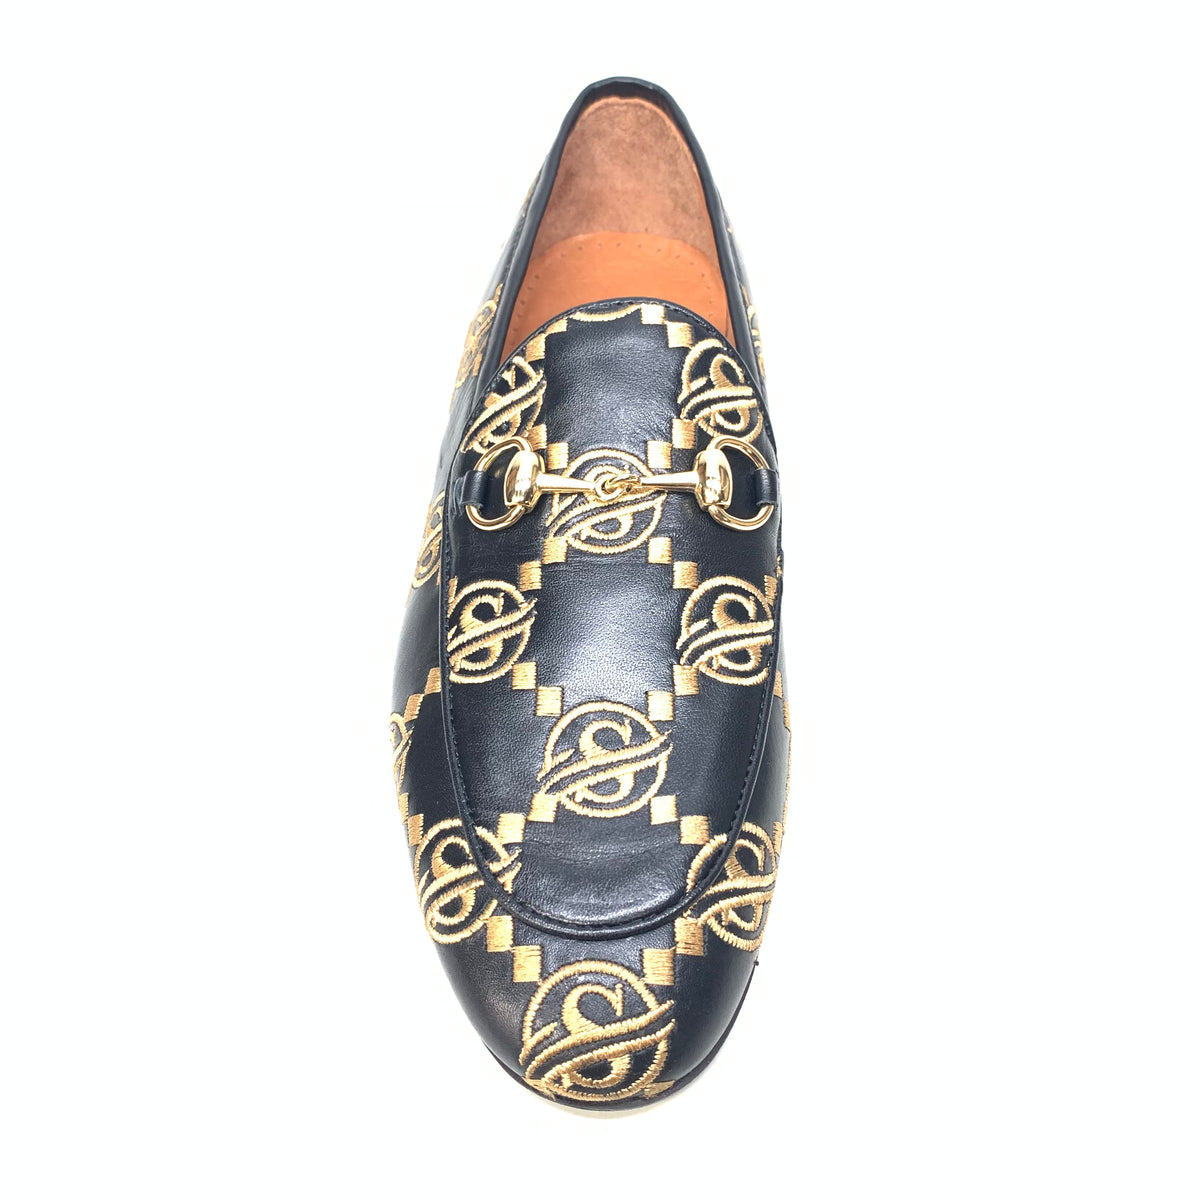 Sigotto Black Gold Embroidered Buckled Penny Loafers - Dudes Boutique